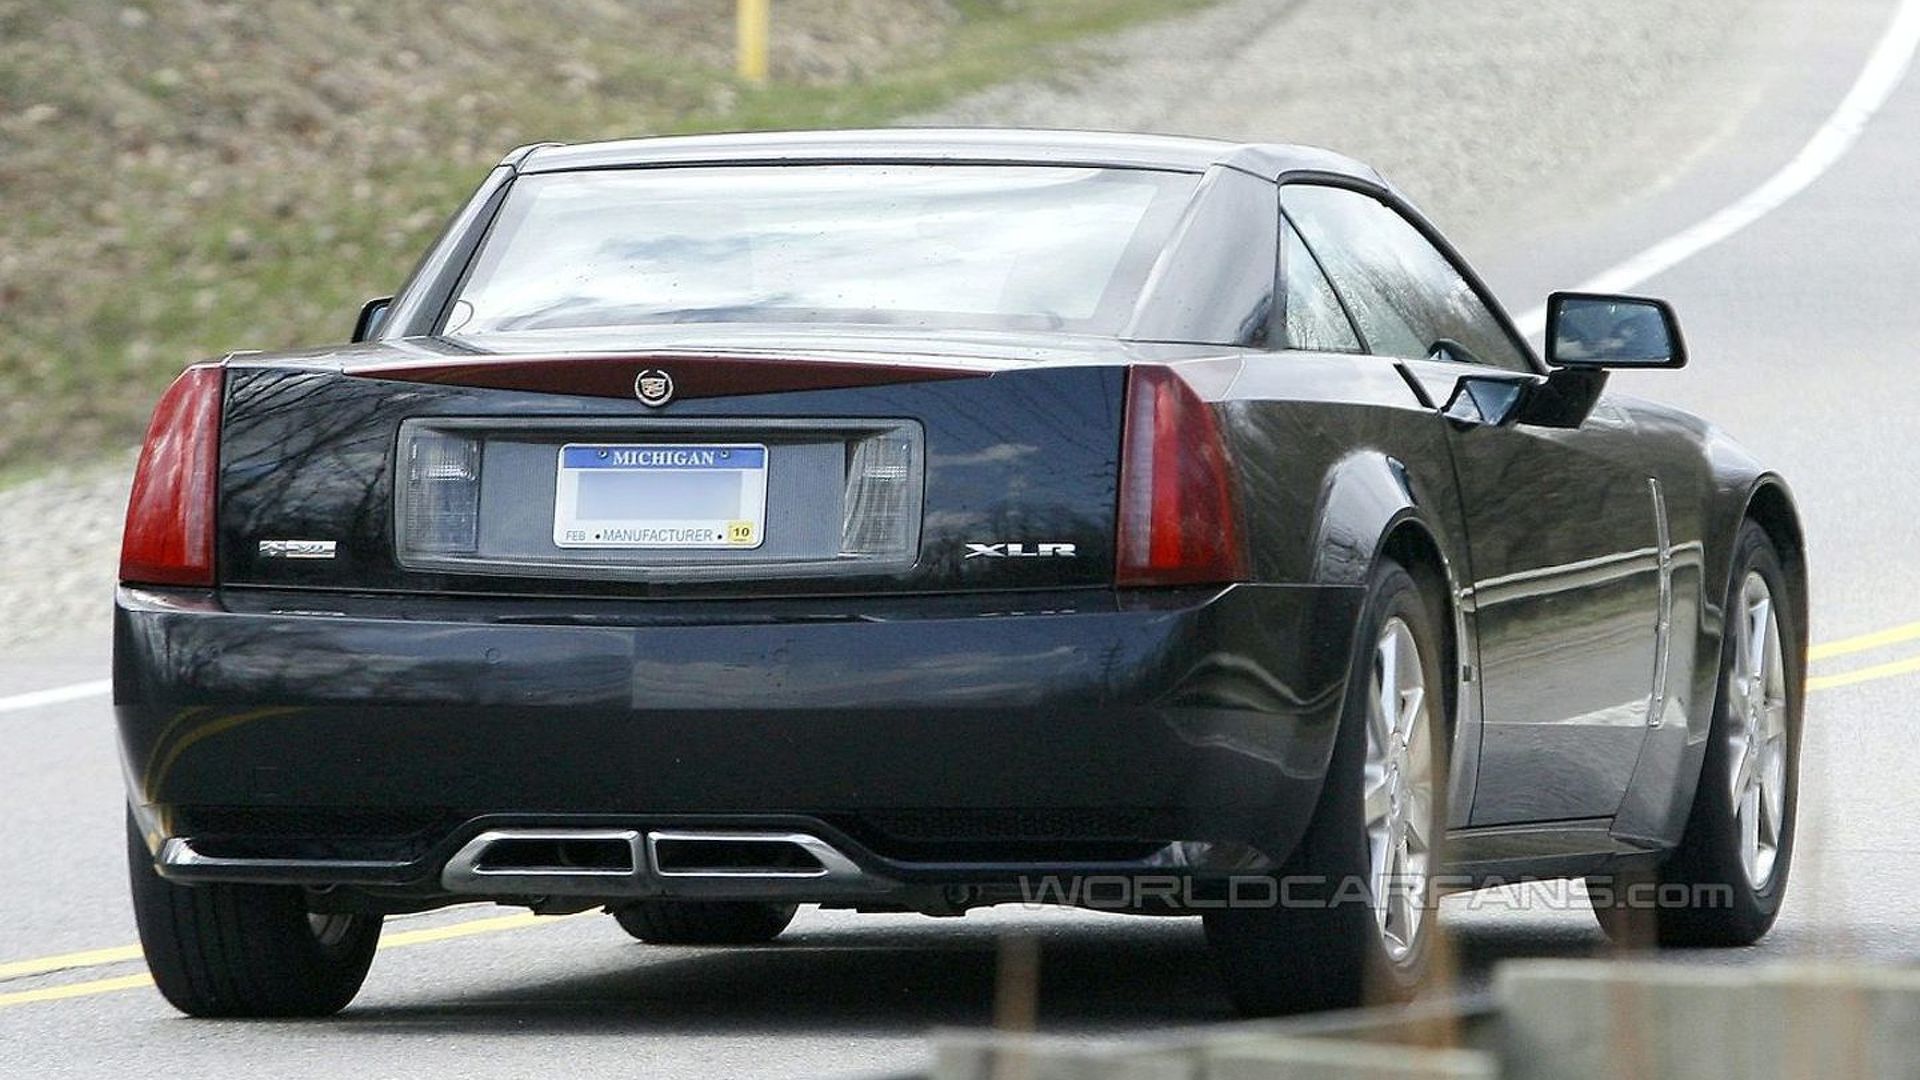 2009 CADILLAC XLR Pictures, Prices and Reviews - Driverbase